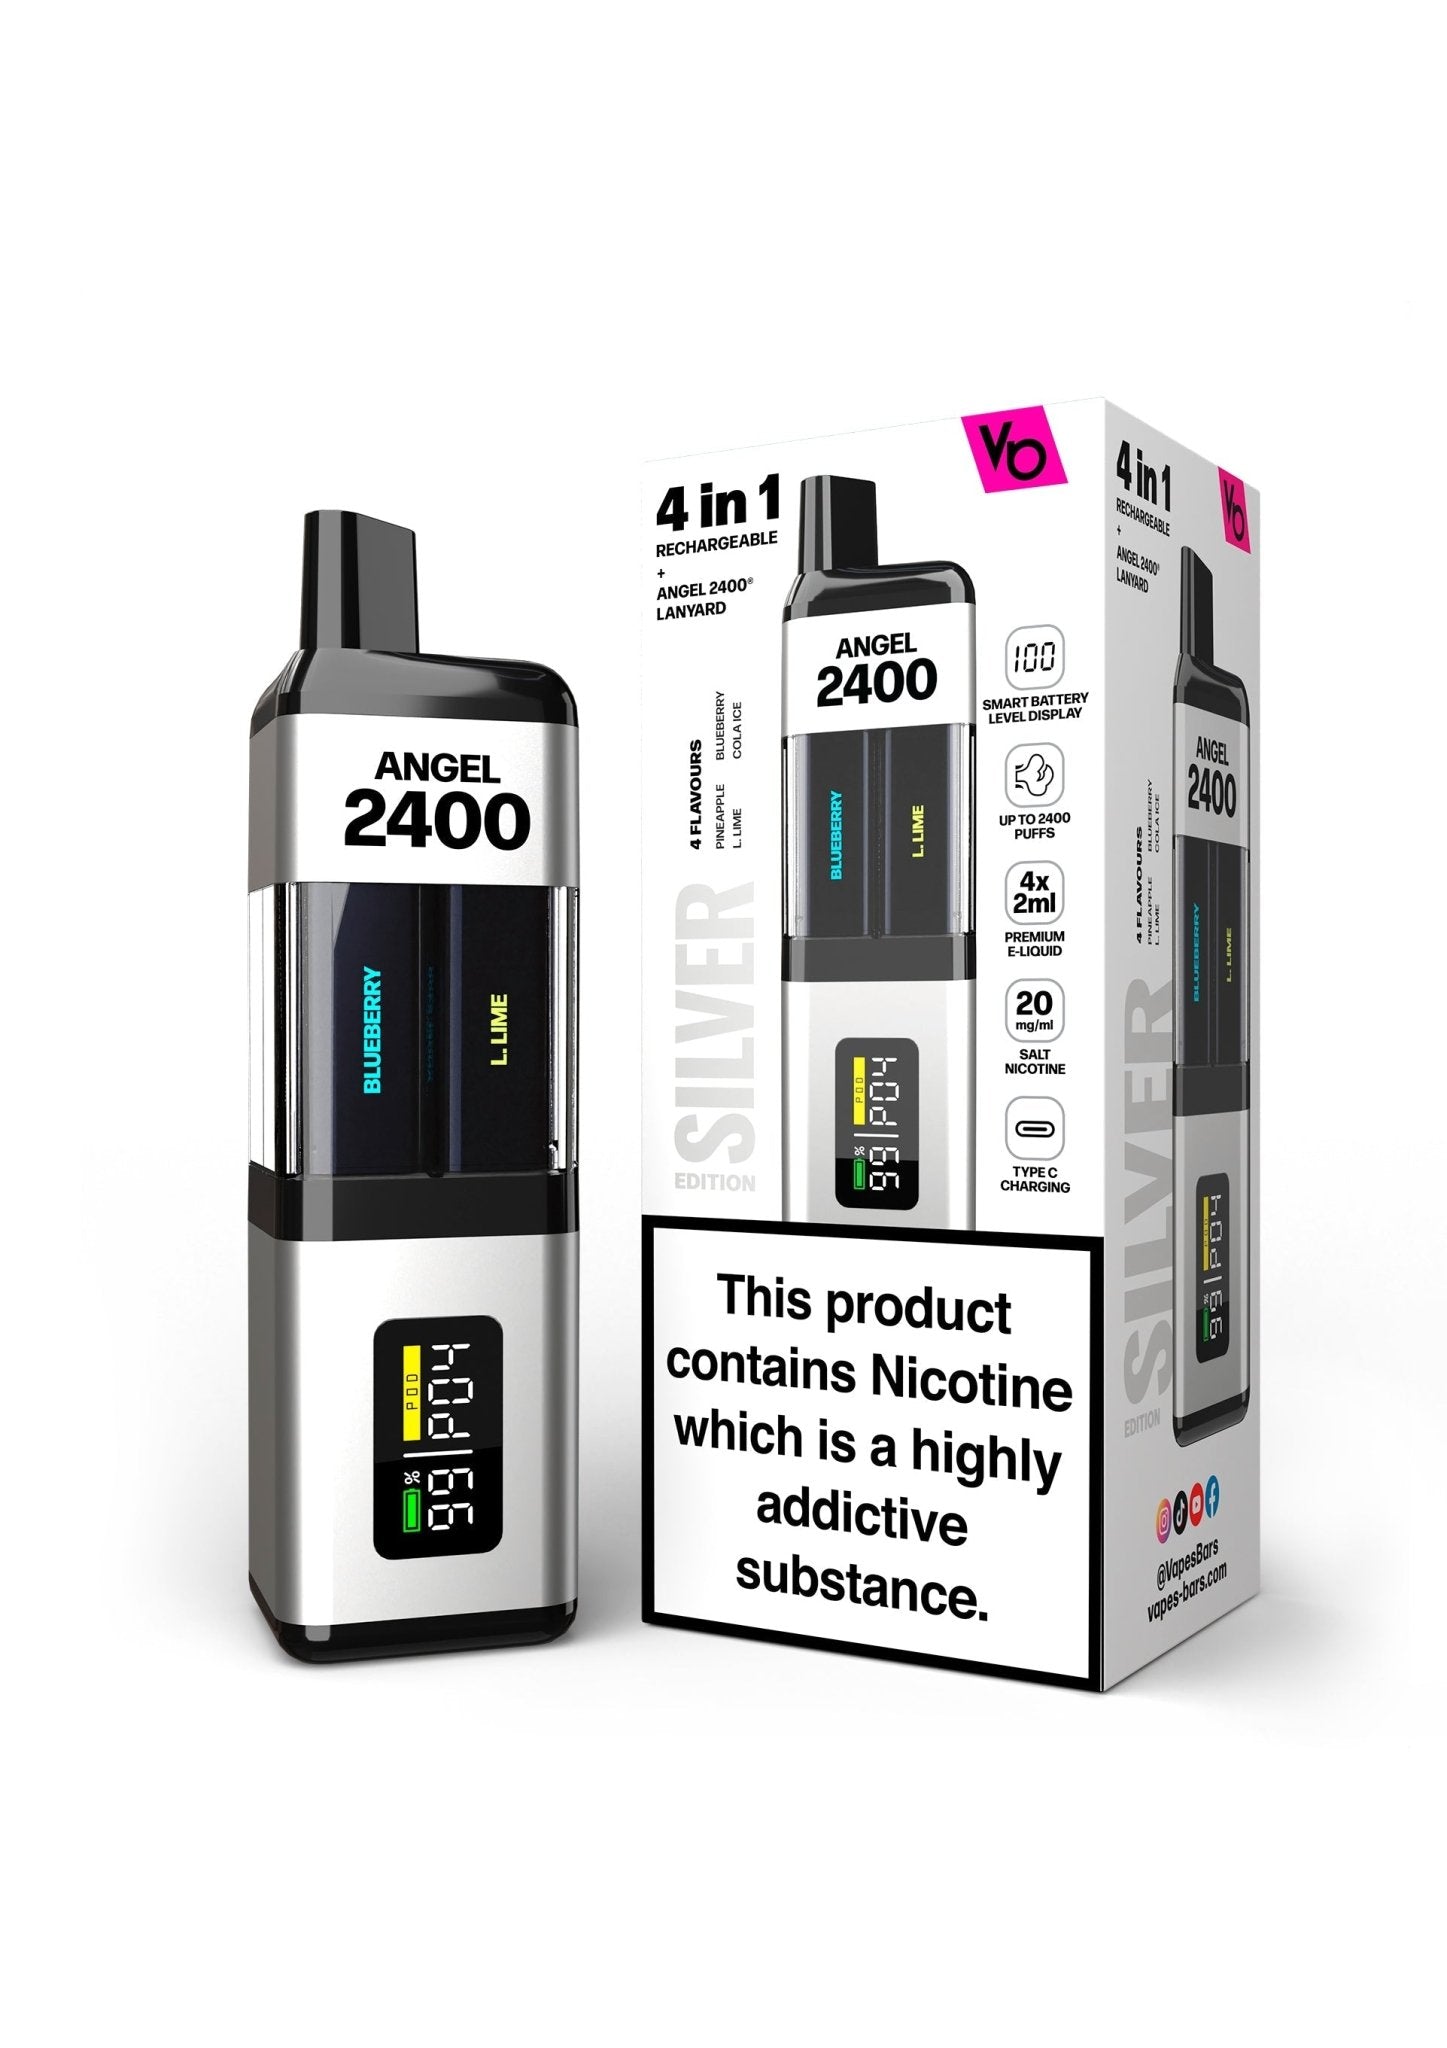 Angel 2400 Puffs Disposble Vape by Vapes Bars (Pack of 5) - Wolfvapes.co.uk-Silver Edition (Multi Flavour)